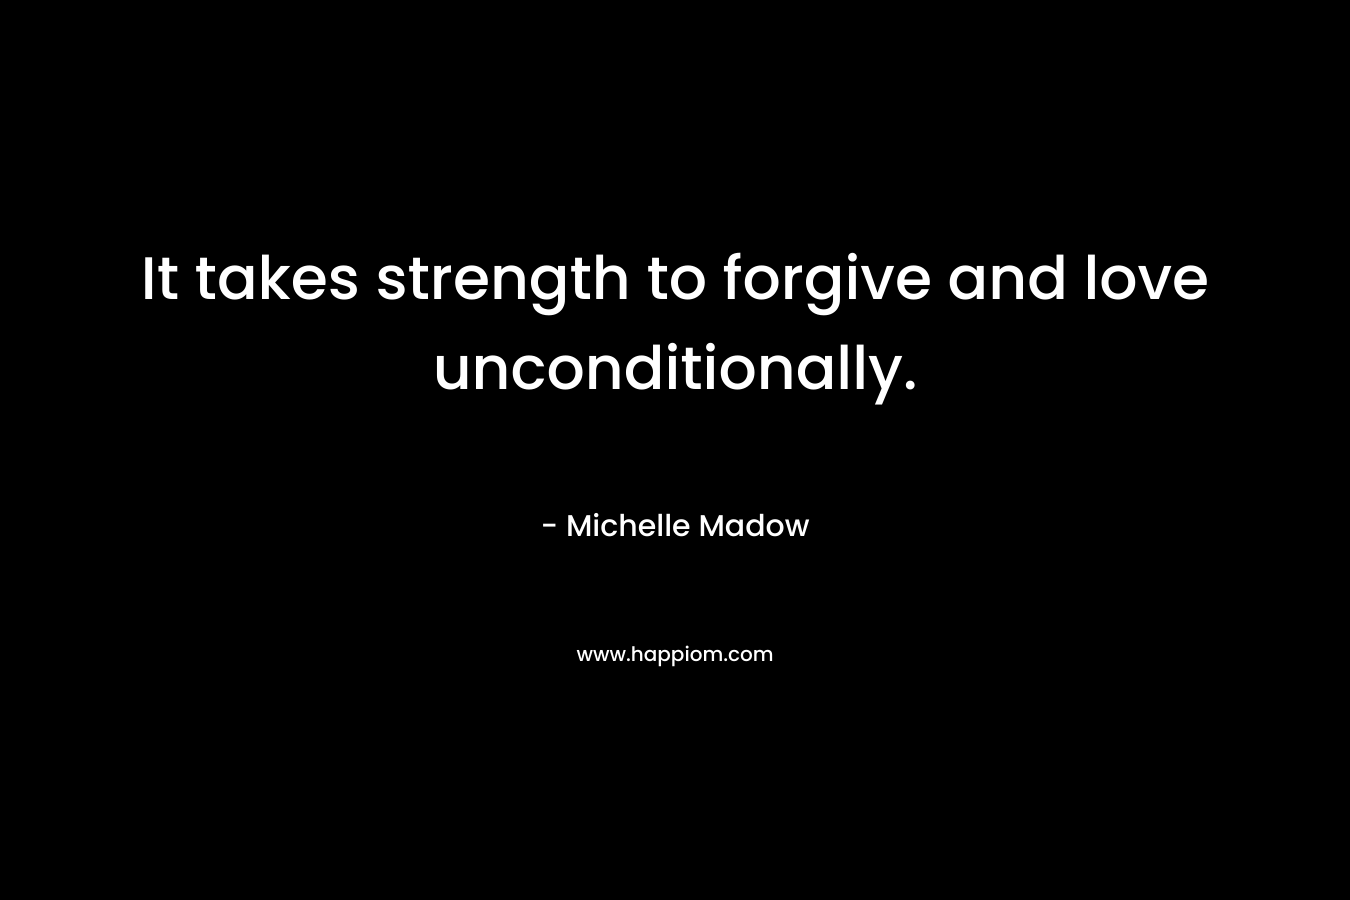 It takes strength to forgive and love unconditionally.